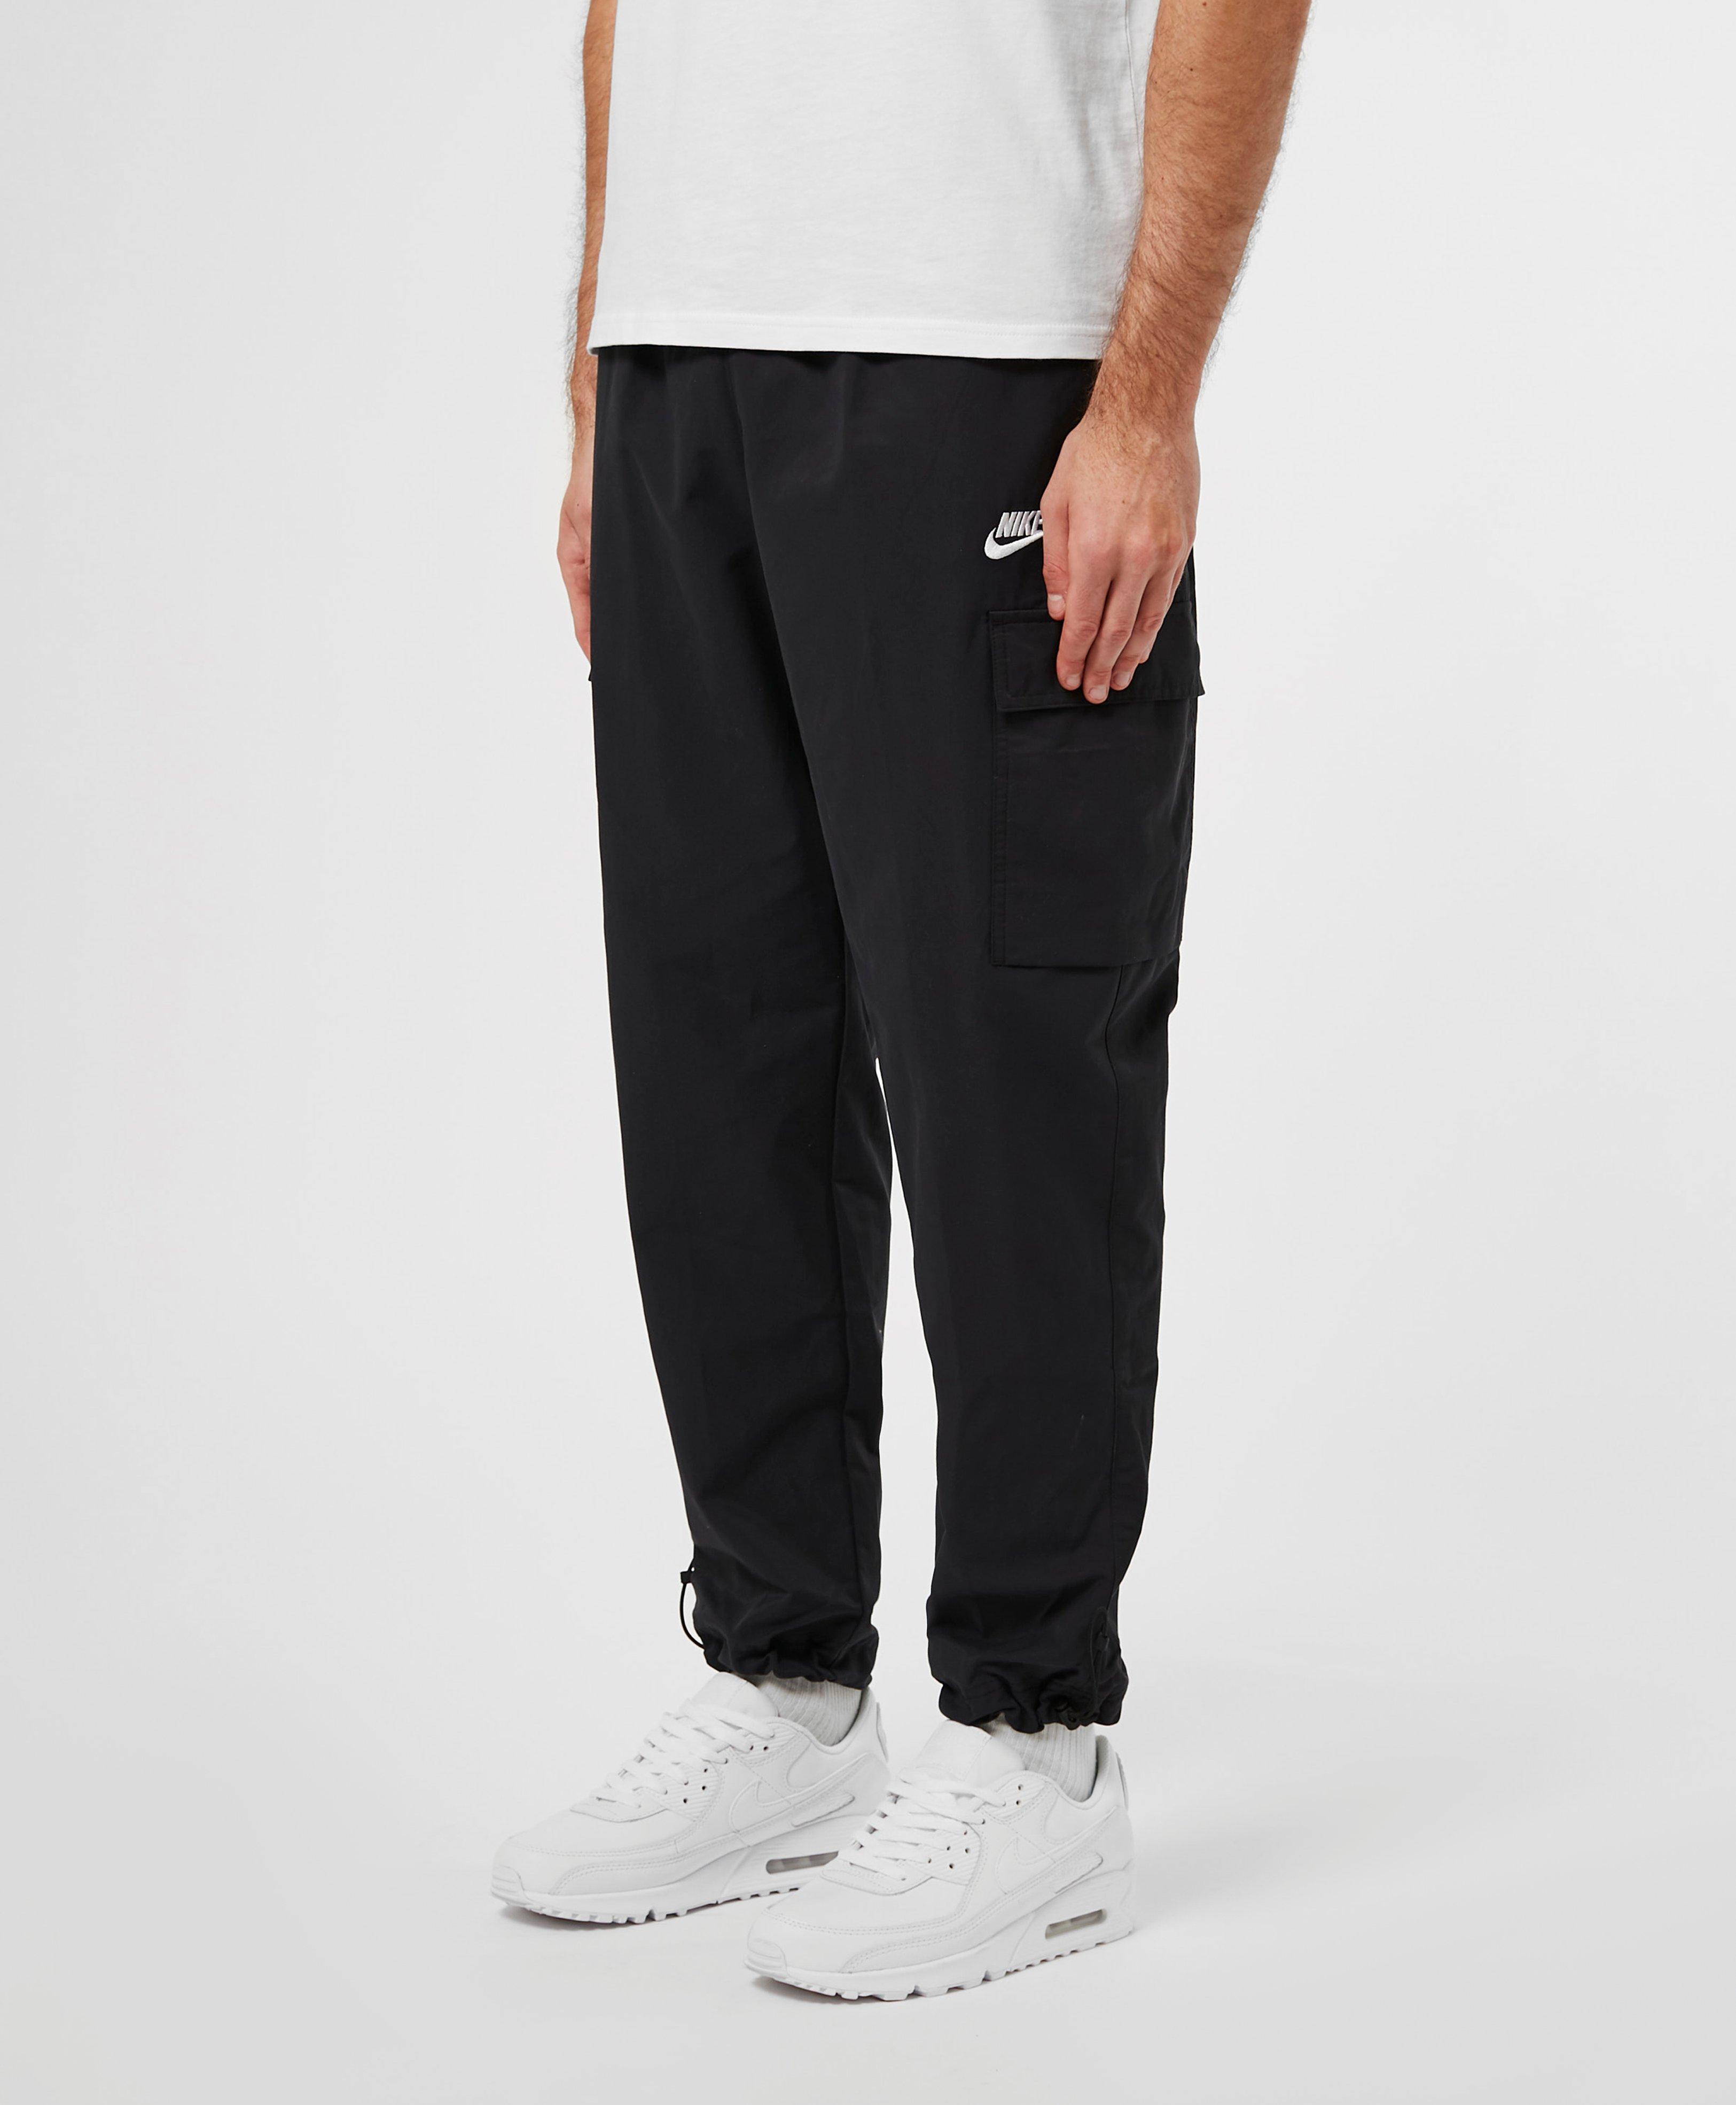 Nike Cotton Players Woven Cargo Track Pants in Black for Men - Lyst